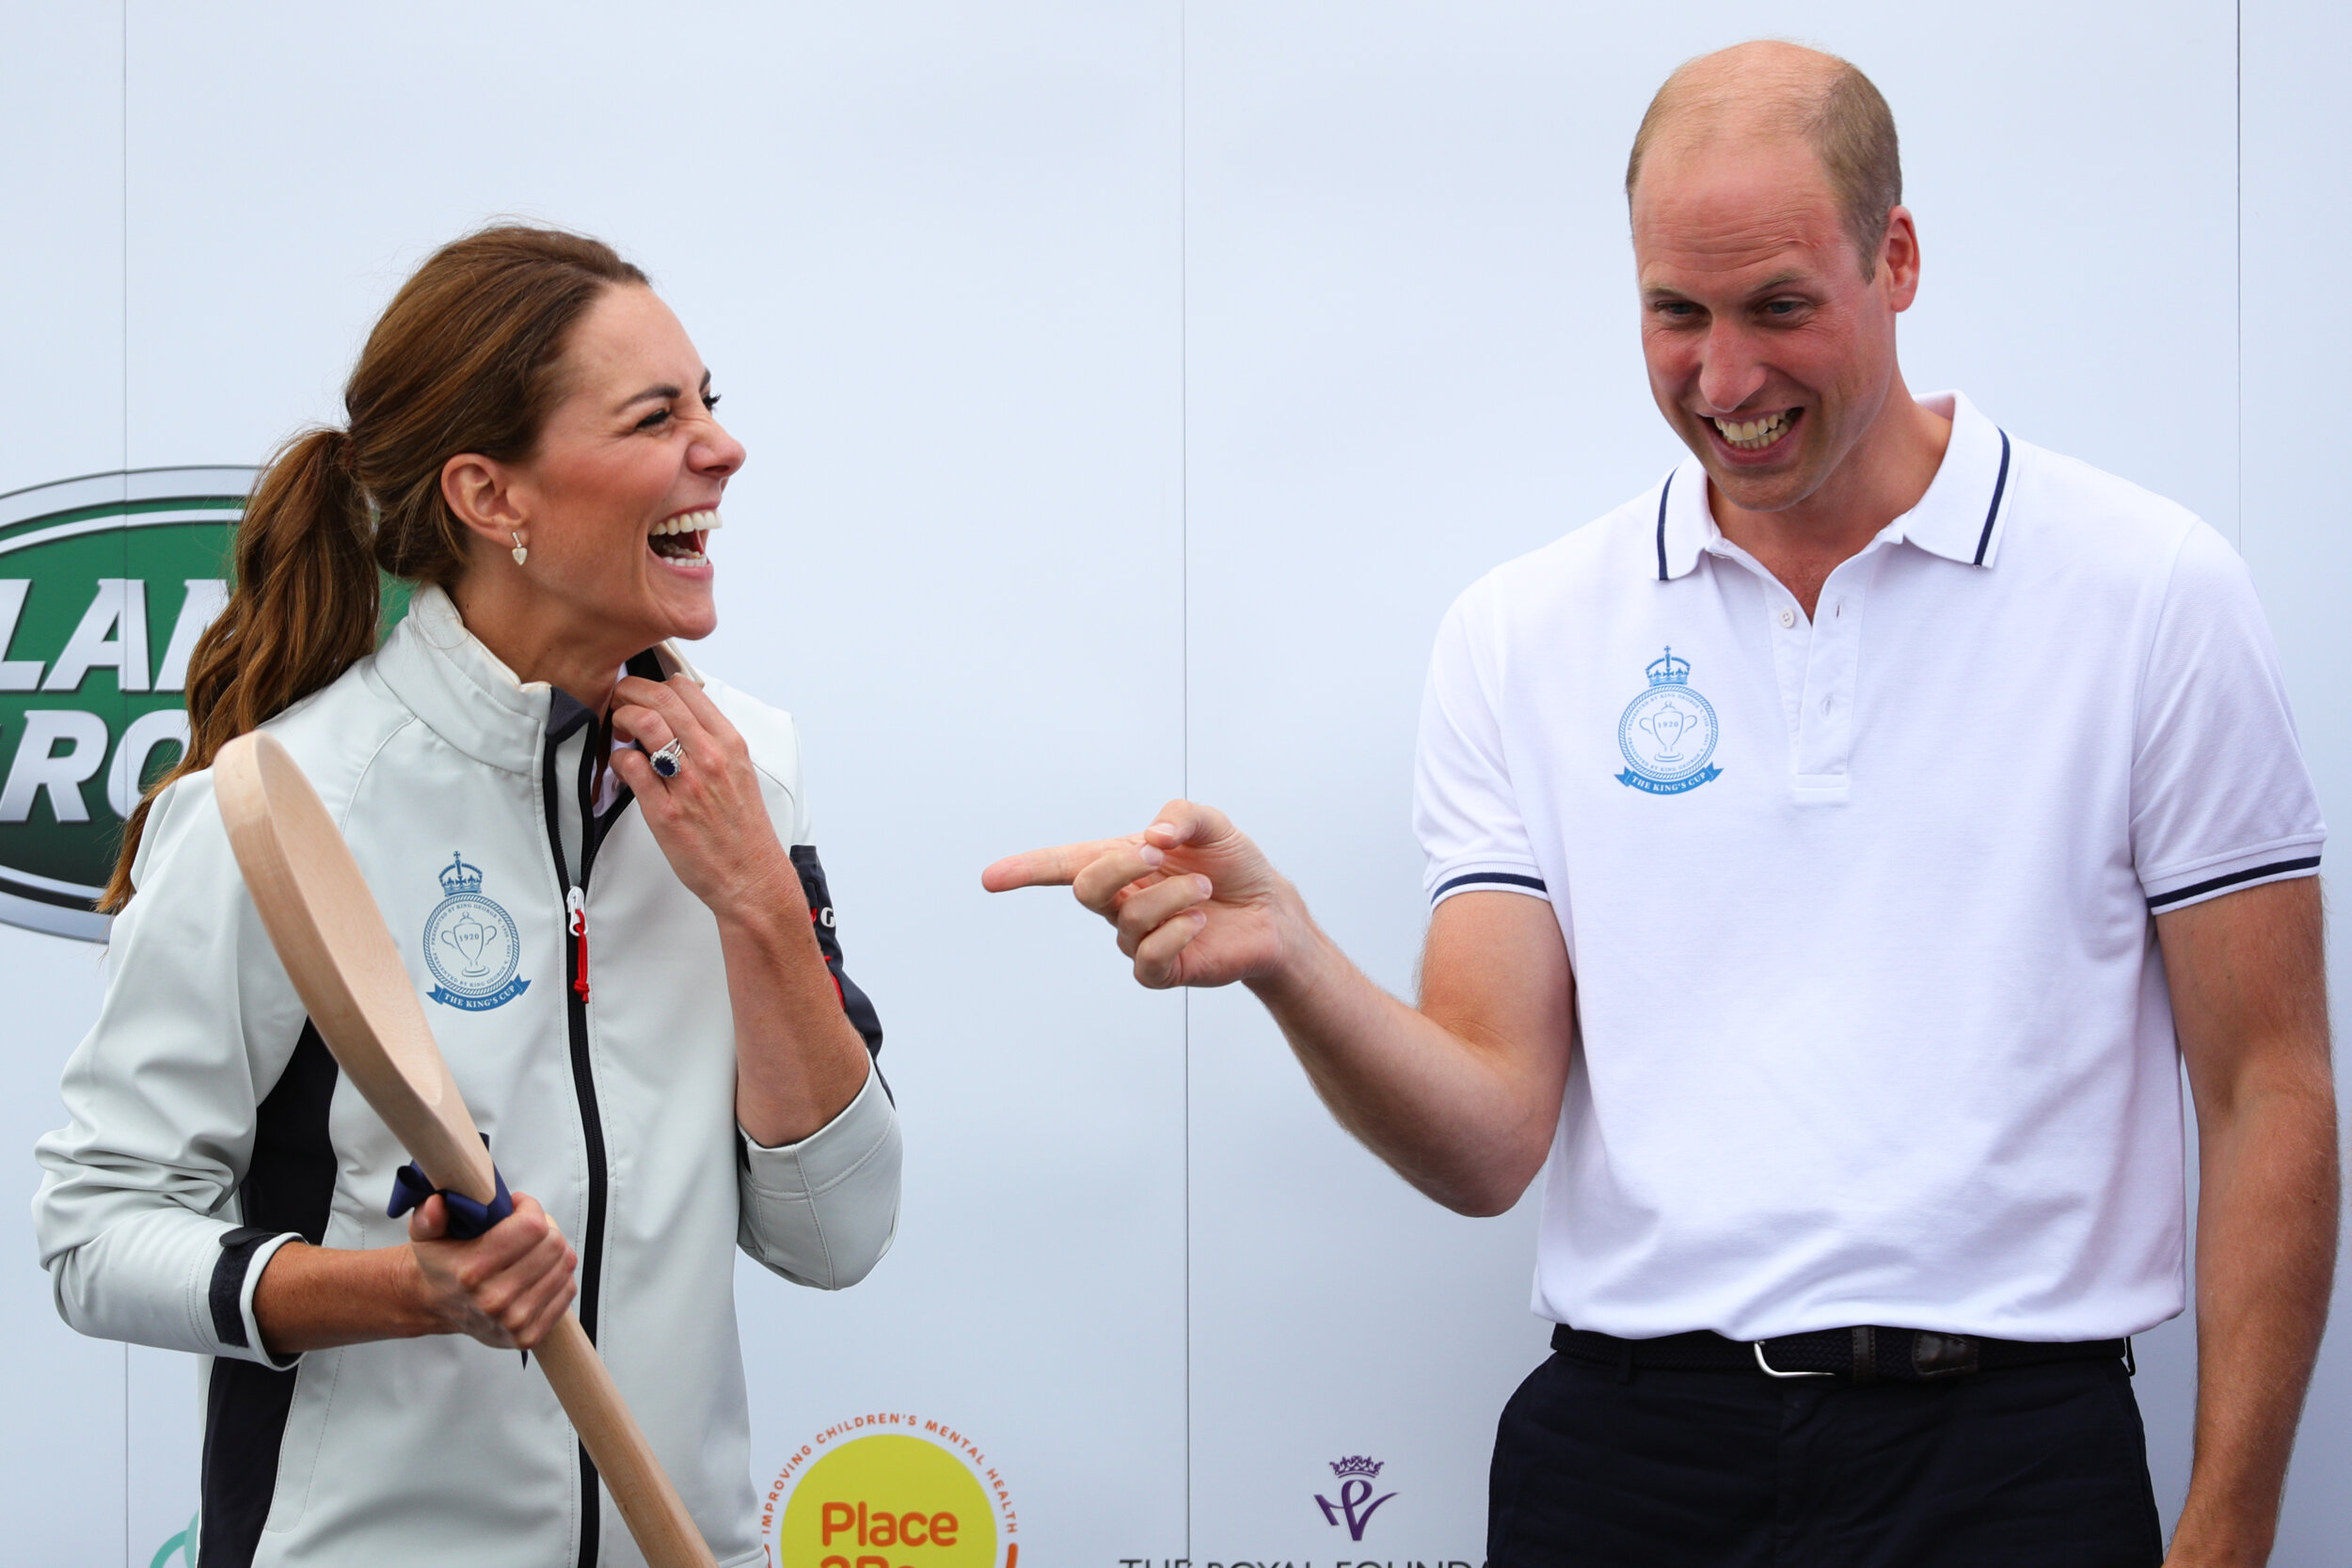  The Duchess and Duke of Cambridge at the prize giving after the King's Cup regatta at Cowes on the Isle of Wight. Picture by: Aaron Chown/PA Images. Date taken: 08-Aug-2019 